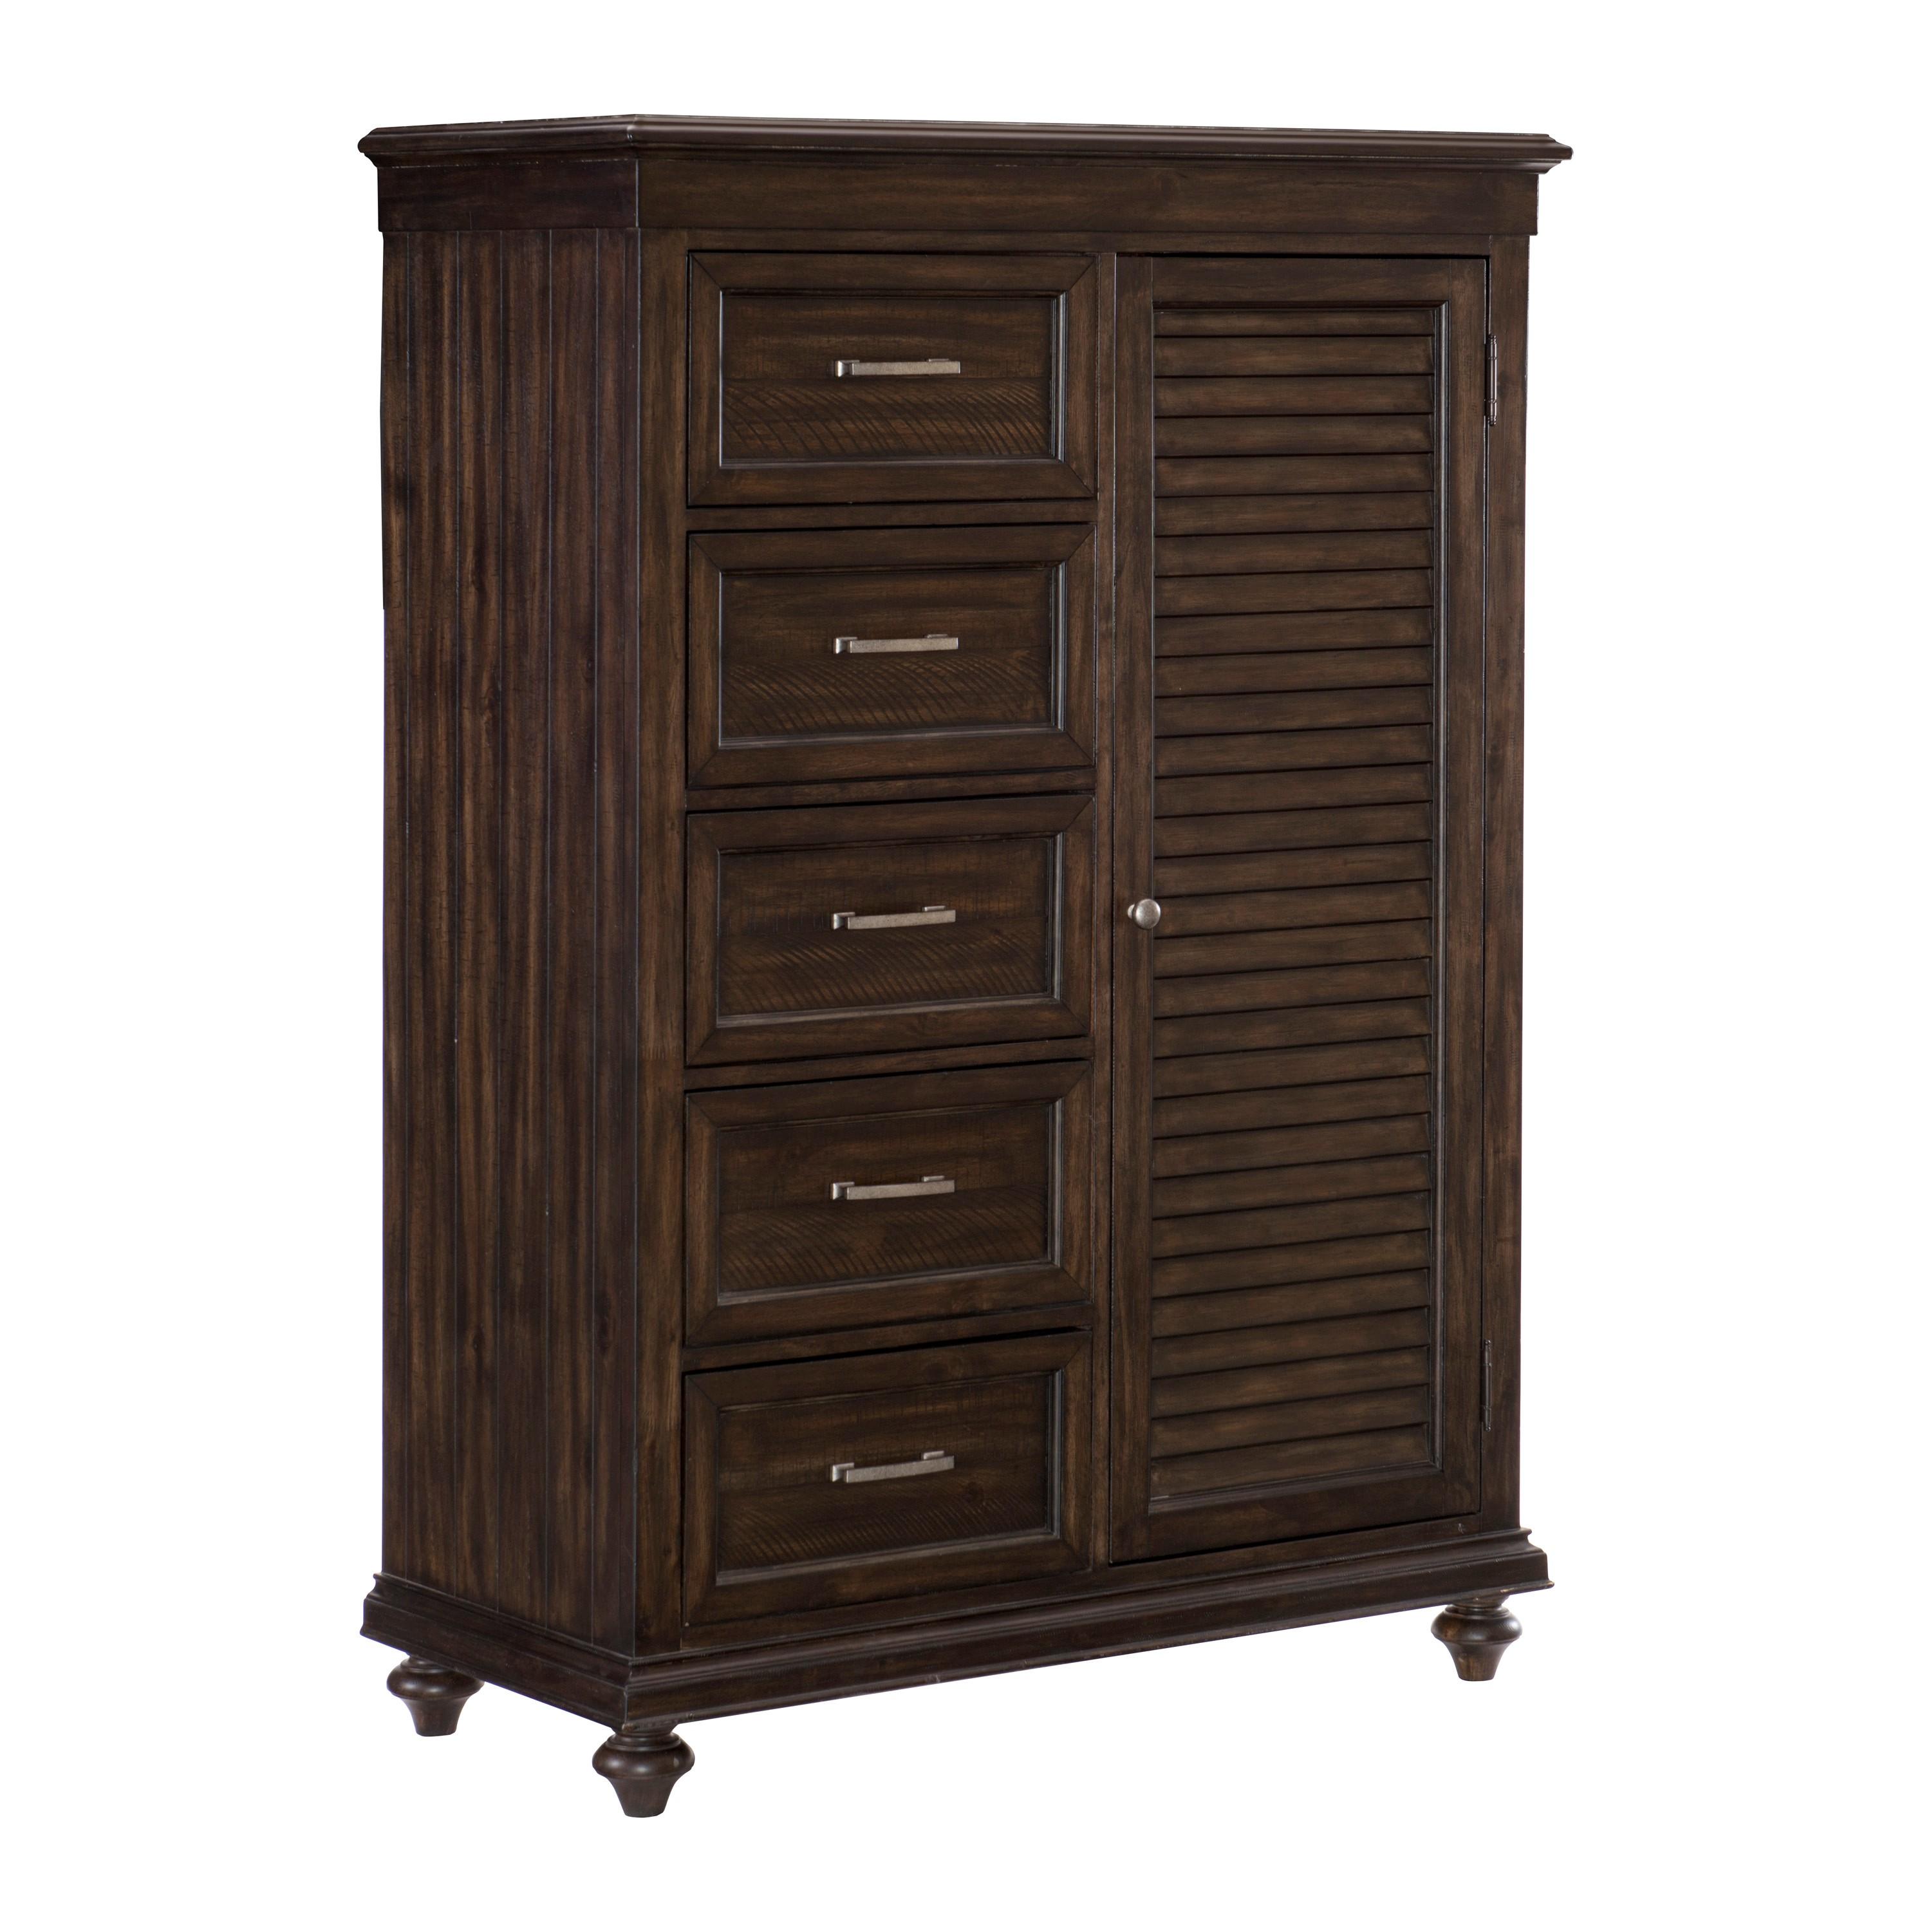 

    
Transitional Driftwood Charcoal Wood Wardrobe Chest Homelegance 1689-10 Cardano
